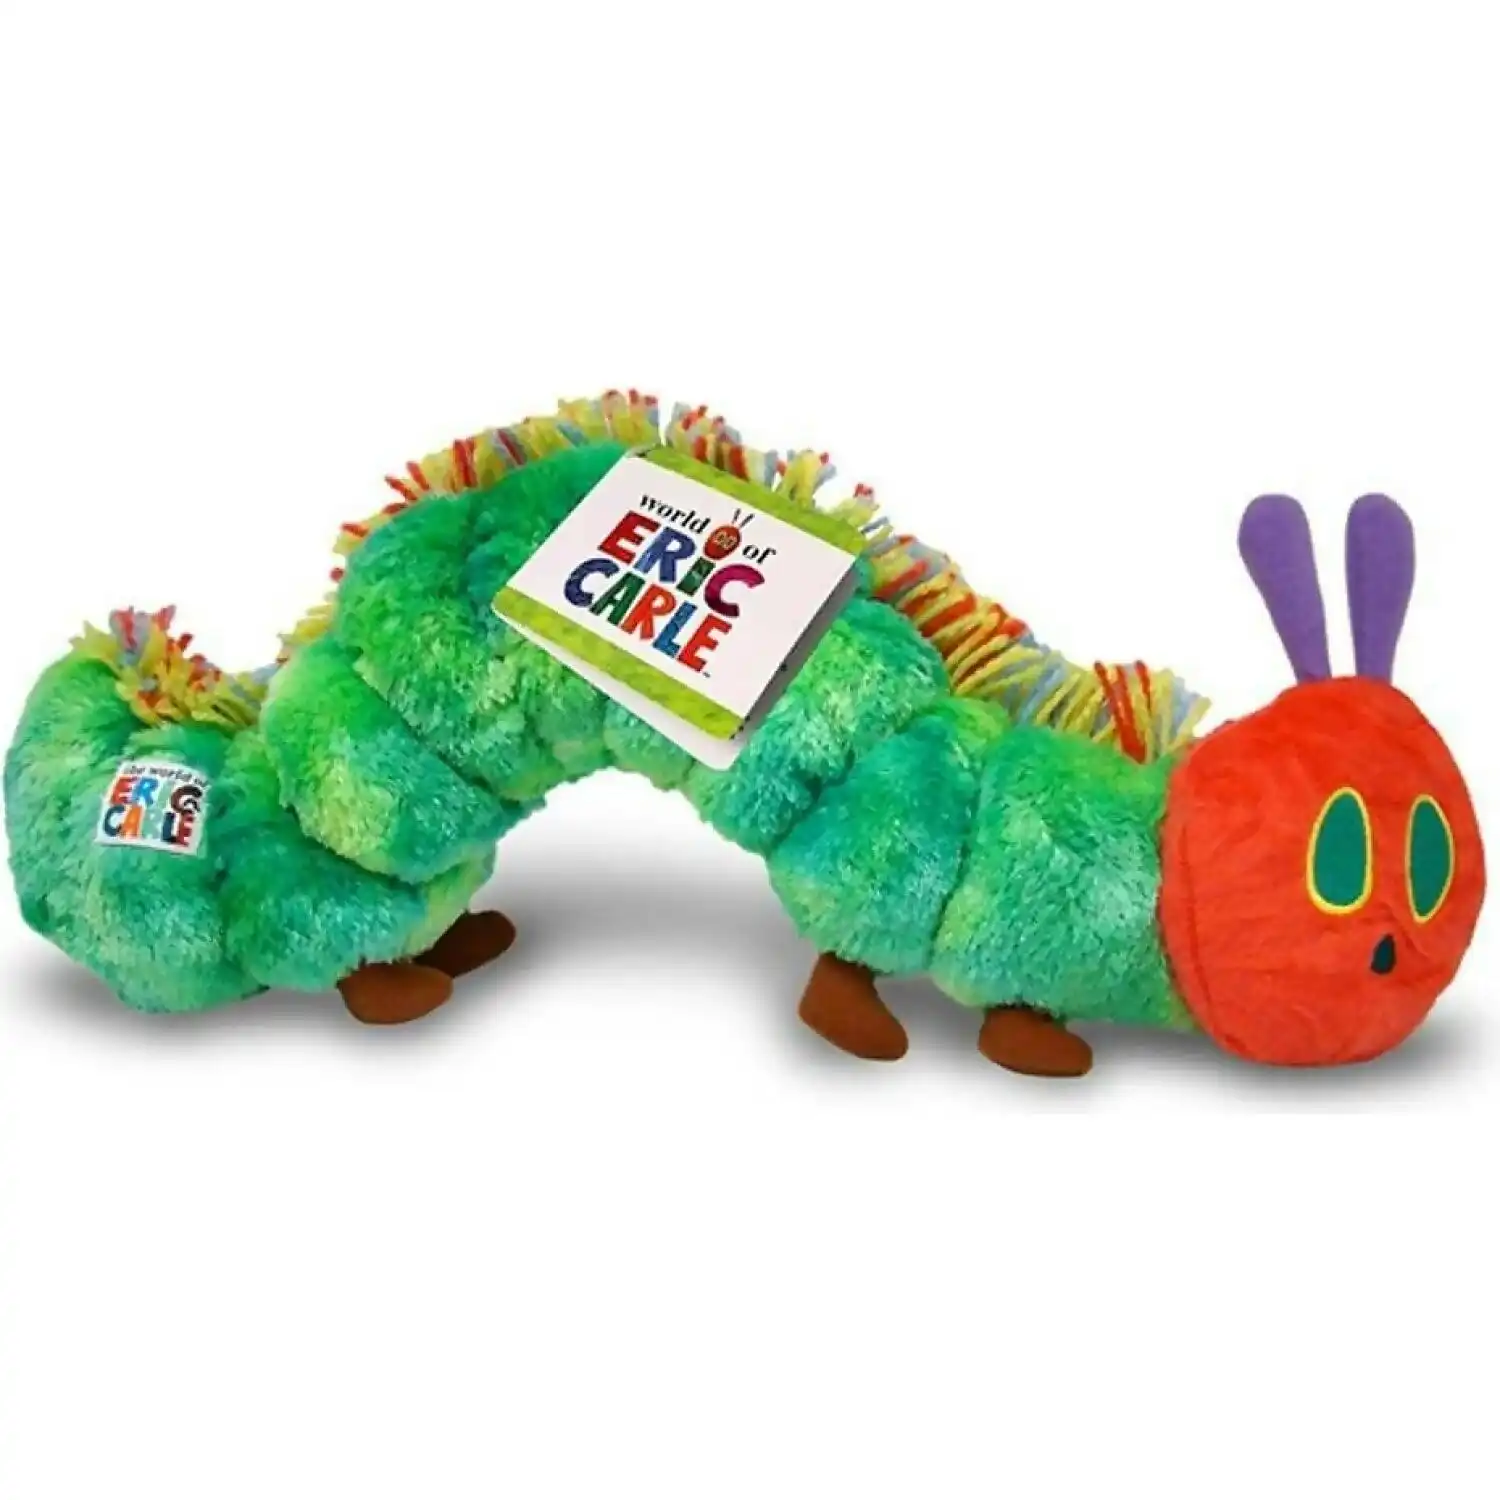 The Very Hungry Caterpillar - 40cm Plush Large Caterpillar - The World Of Eric Carle